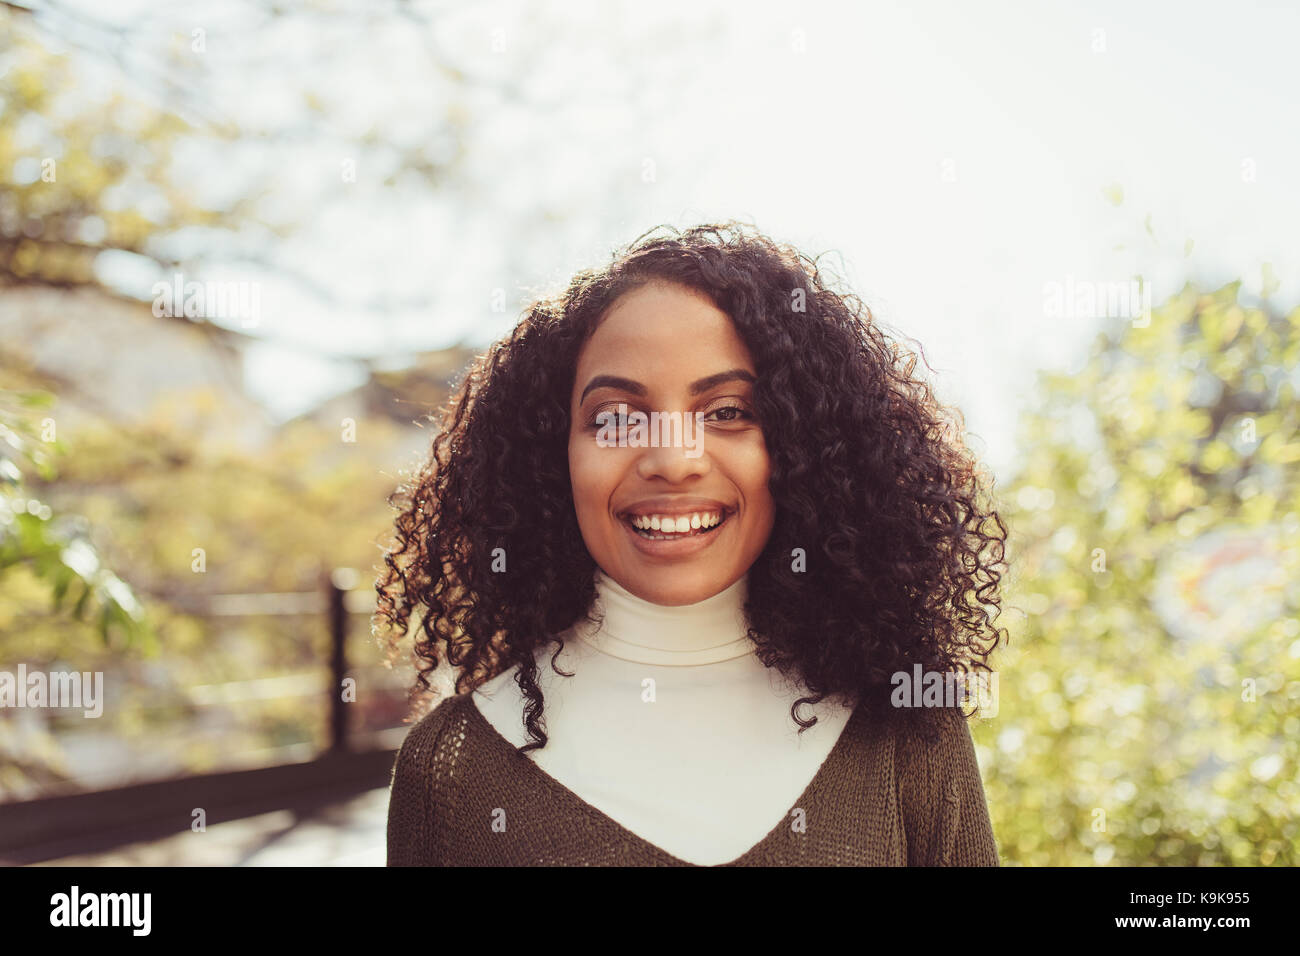 Young woman with curly hair standing outdoors. Smiling woman standing in morning sun. Stock Photo